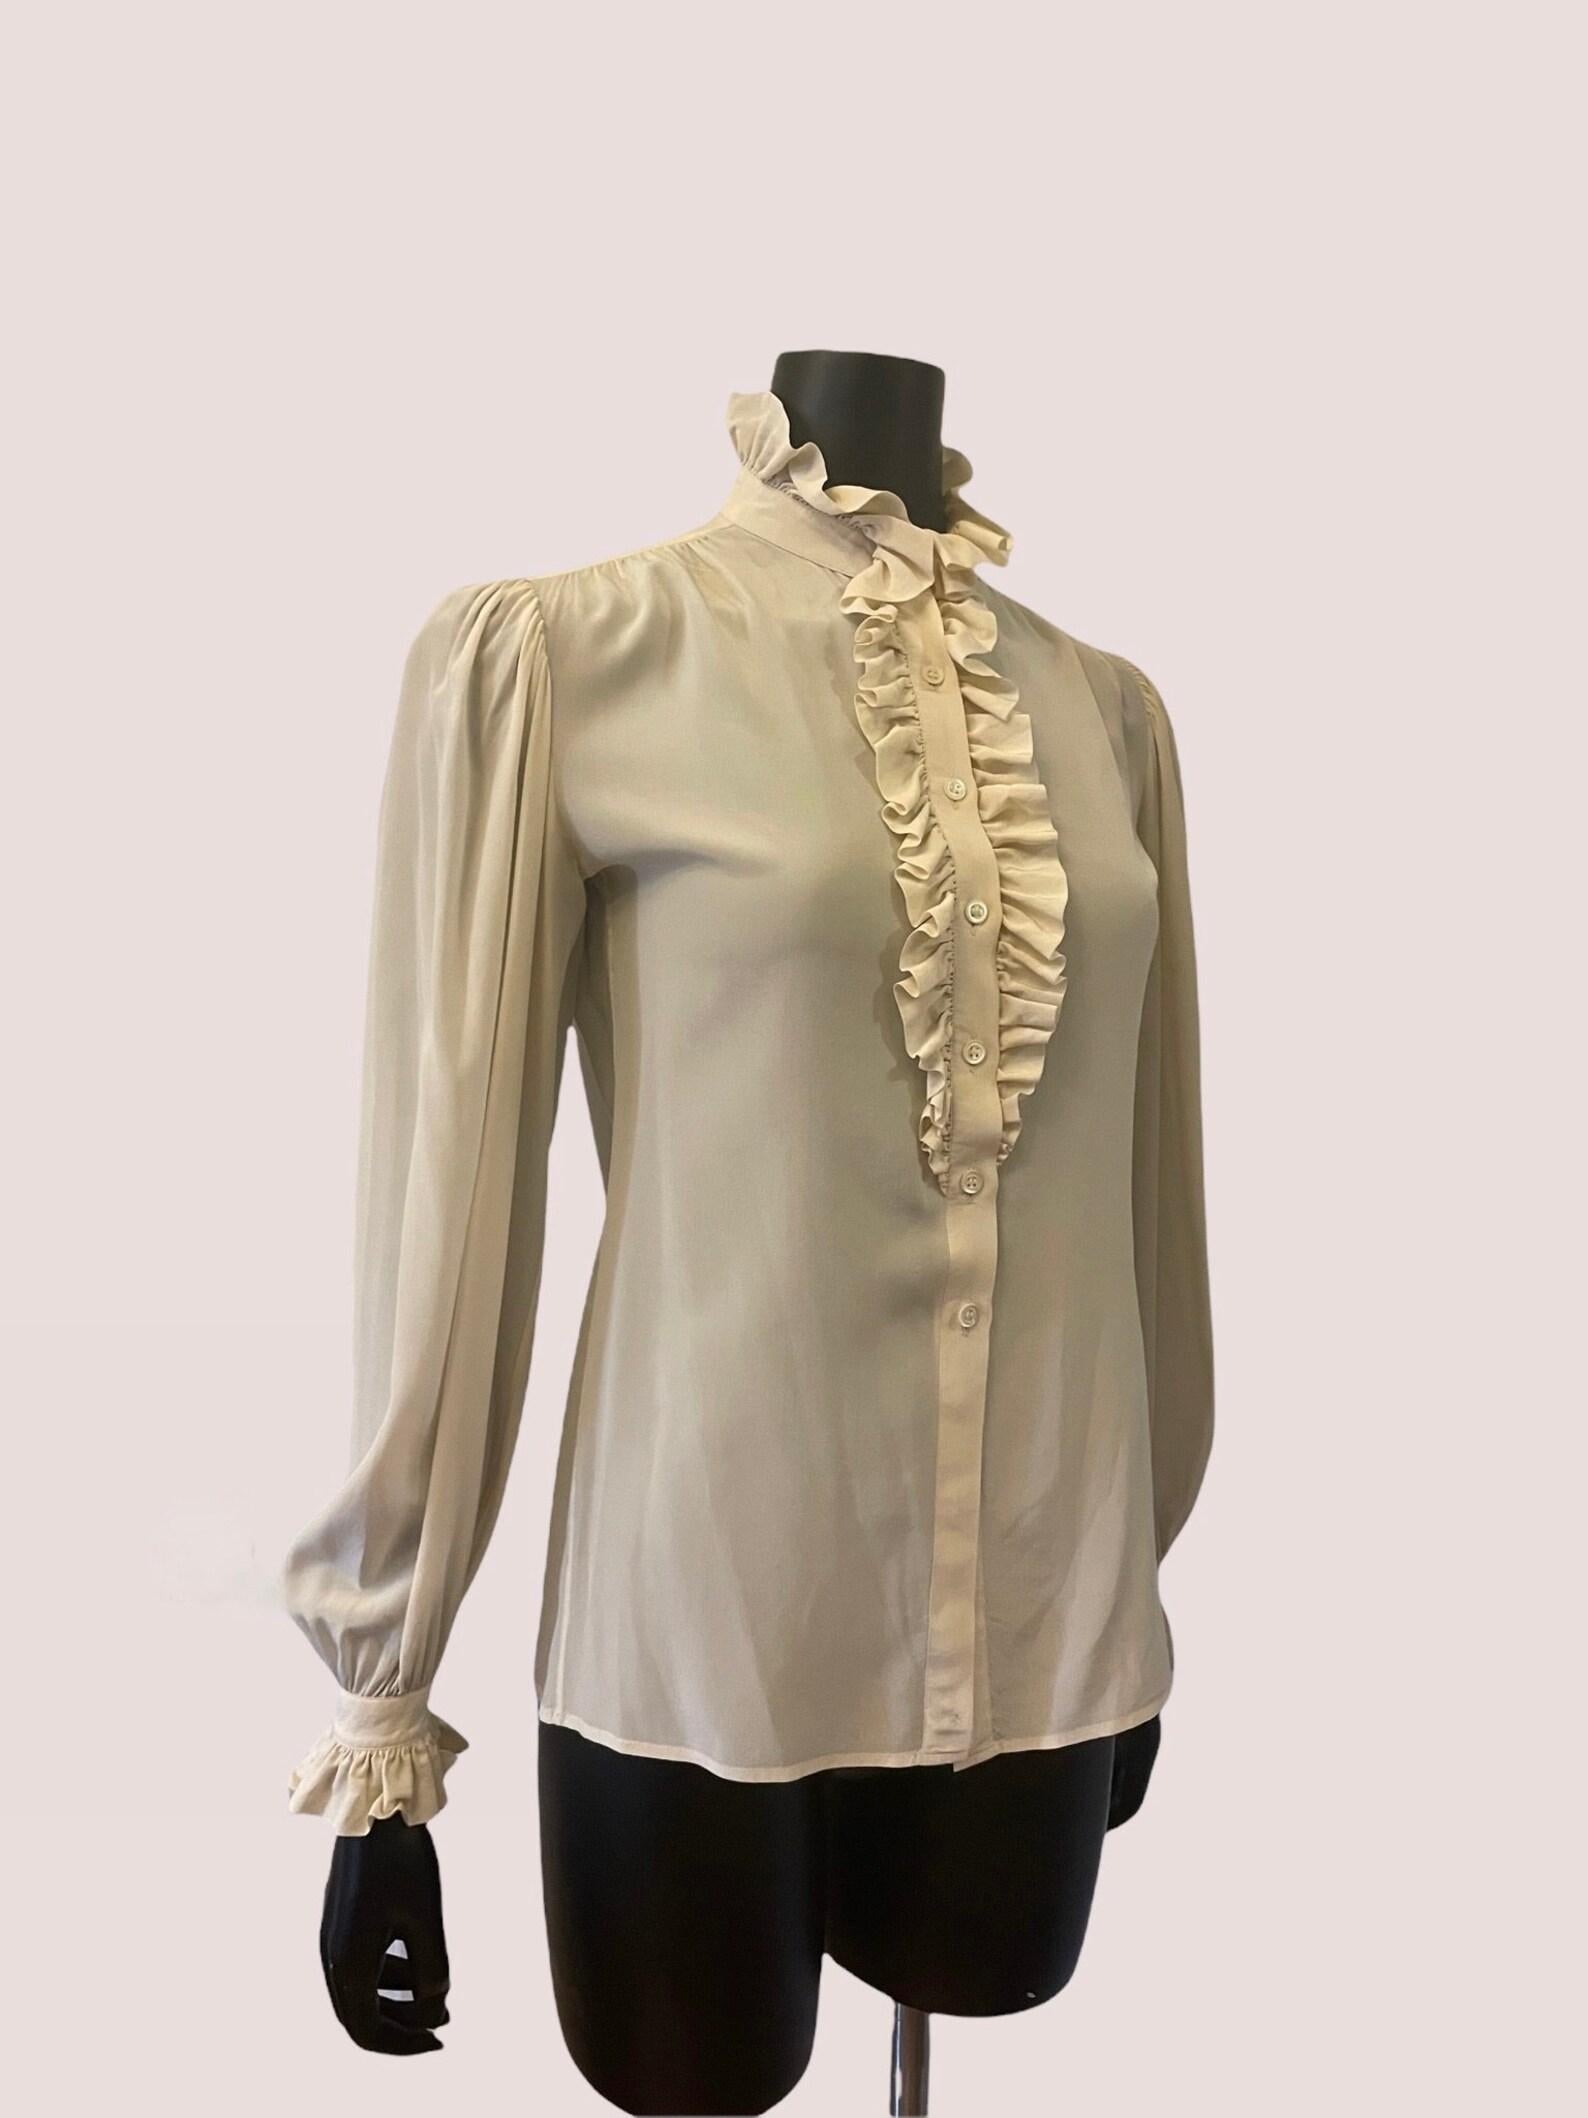 Yves Saint Laurent bone beige silk blouse In Excellent Condition For Sale In Brooklyn, NY